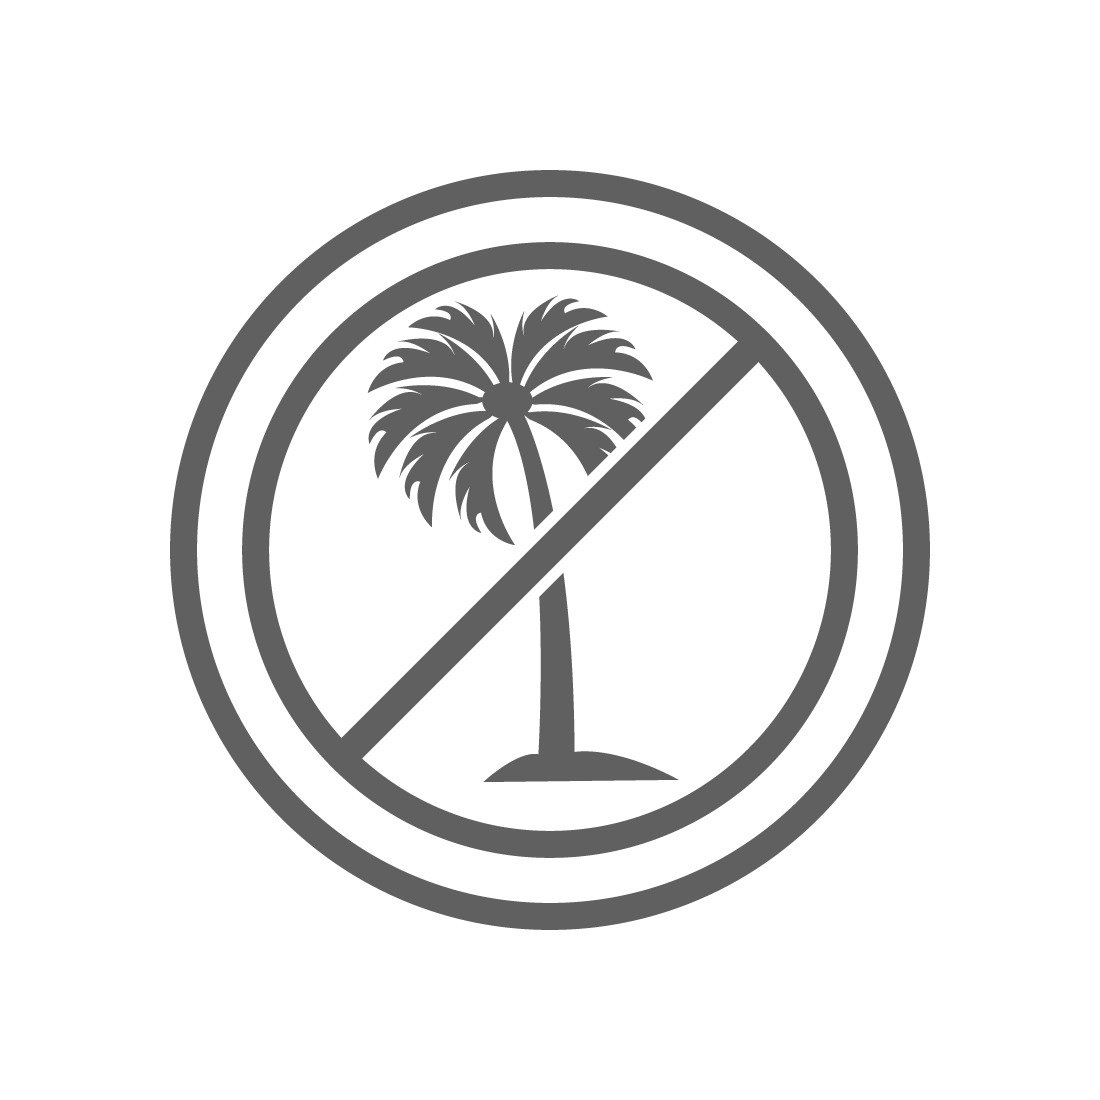 Palm Tree logo design vector images Coconut tree free logo design Premium vector illustration Palm Tree free icon preview image.